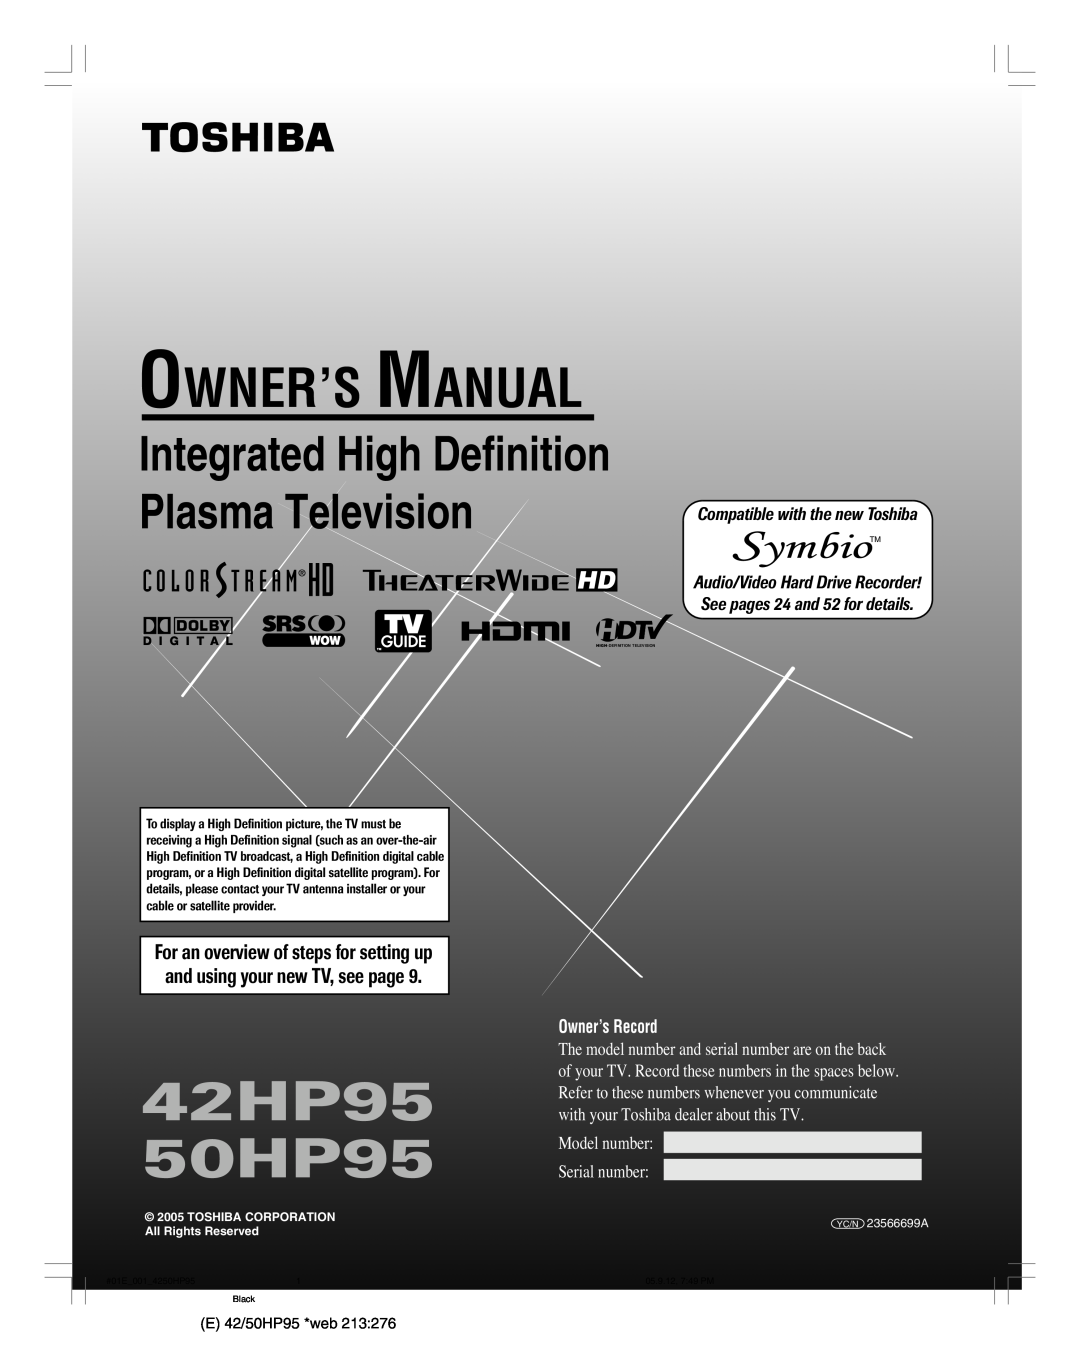 Toshiba owner manual 42HP95 50HP95, Owner’S Manual, Integrated High Definition Plasma Television, Owner’s Record 